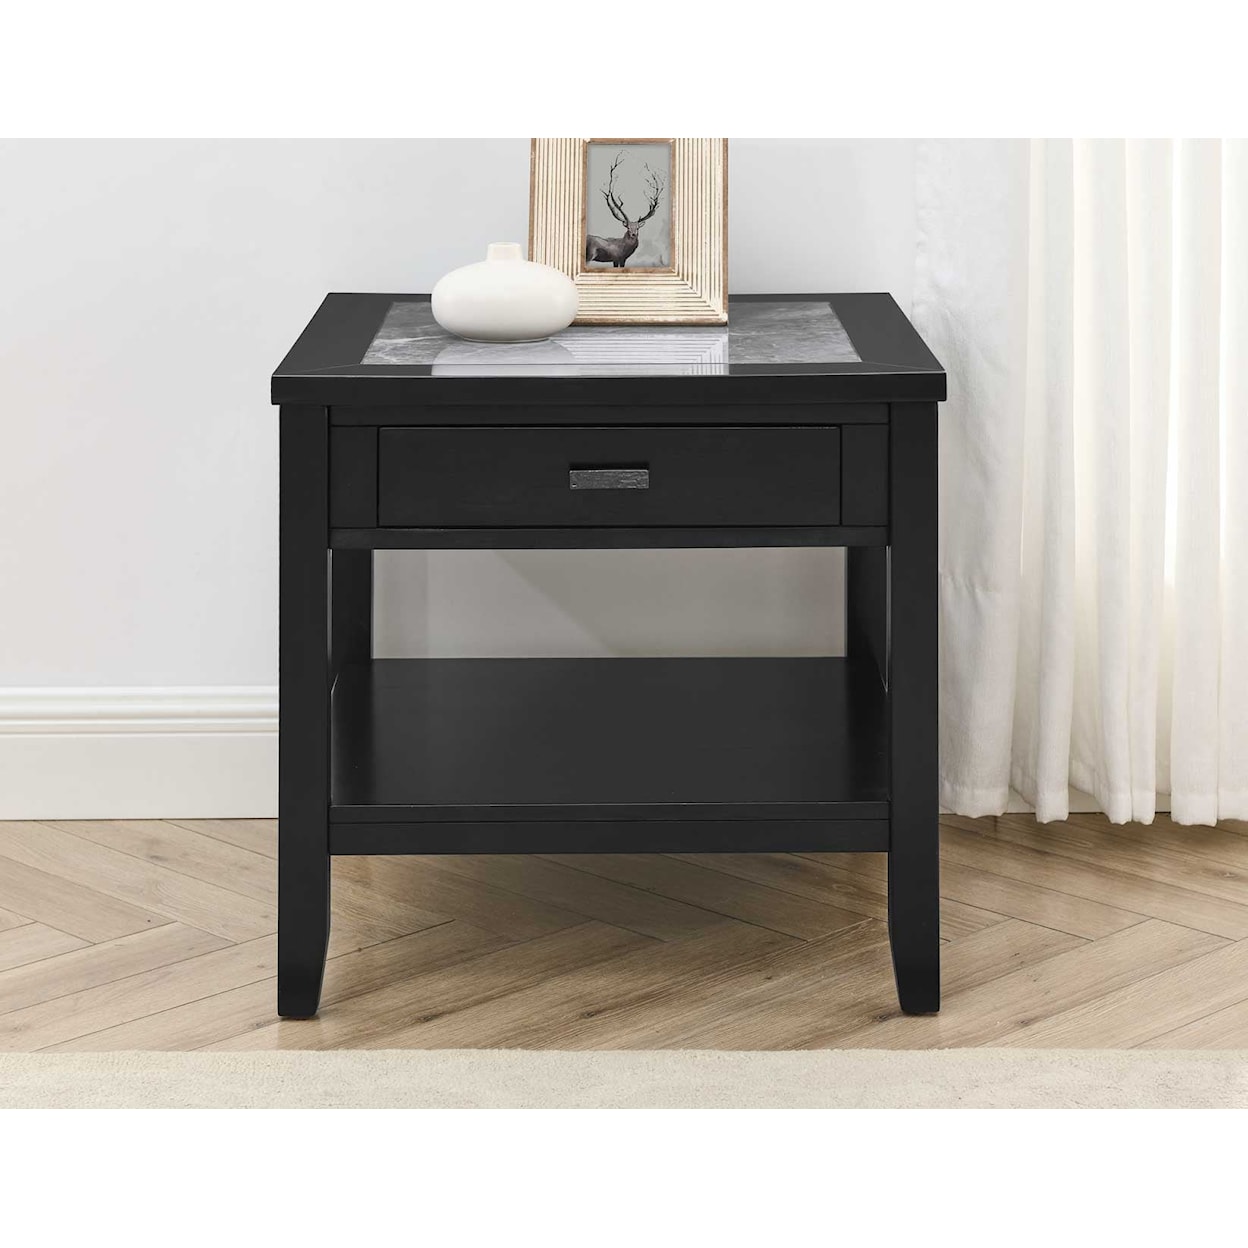 Prime Garvine End Table with Storage